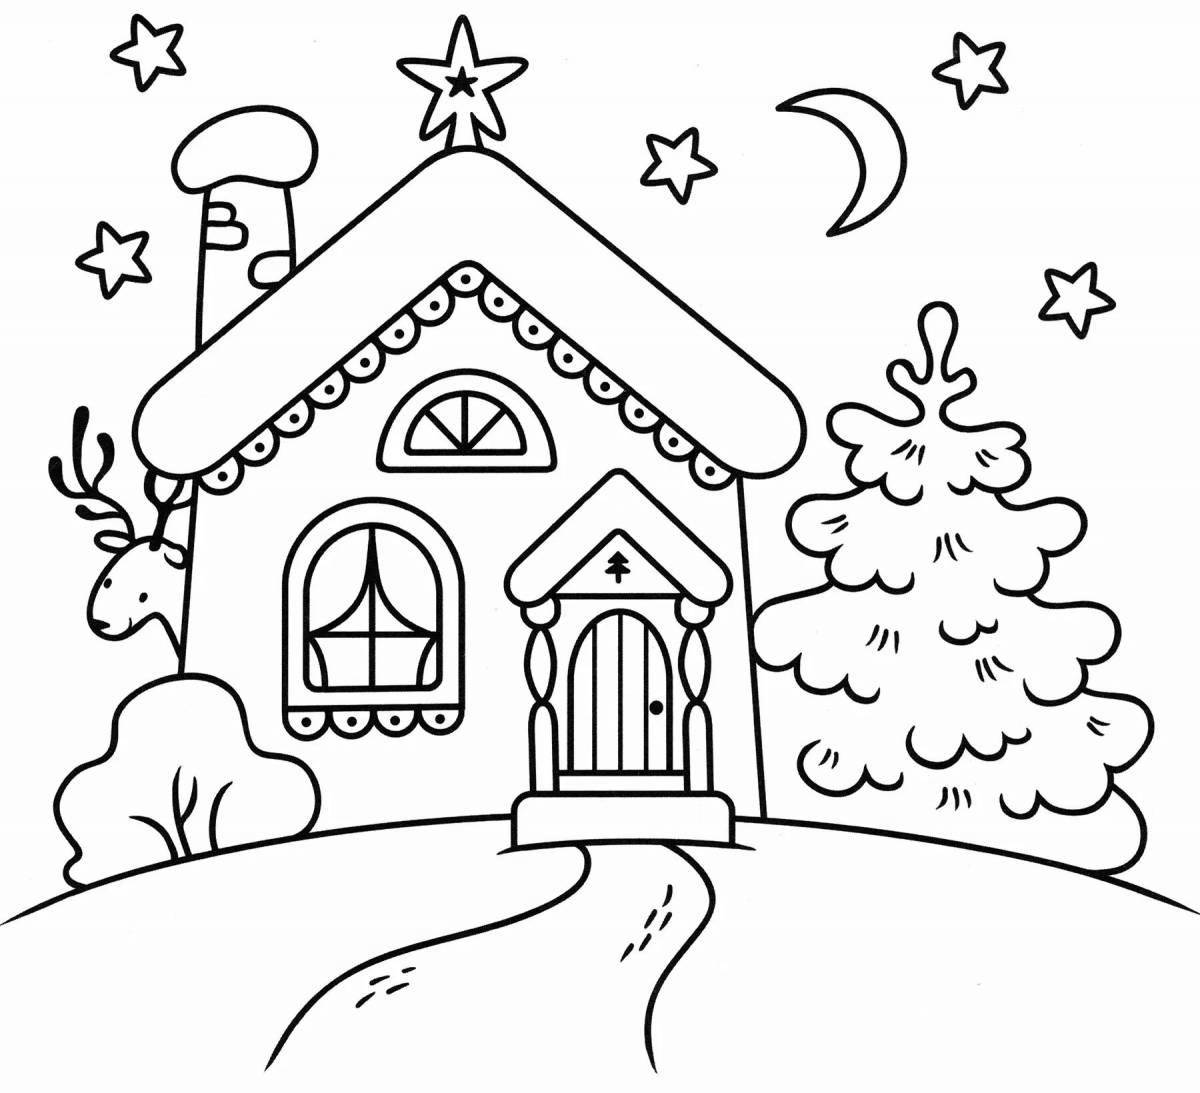 Sunny tree house coloring page